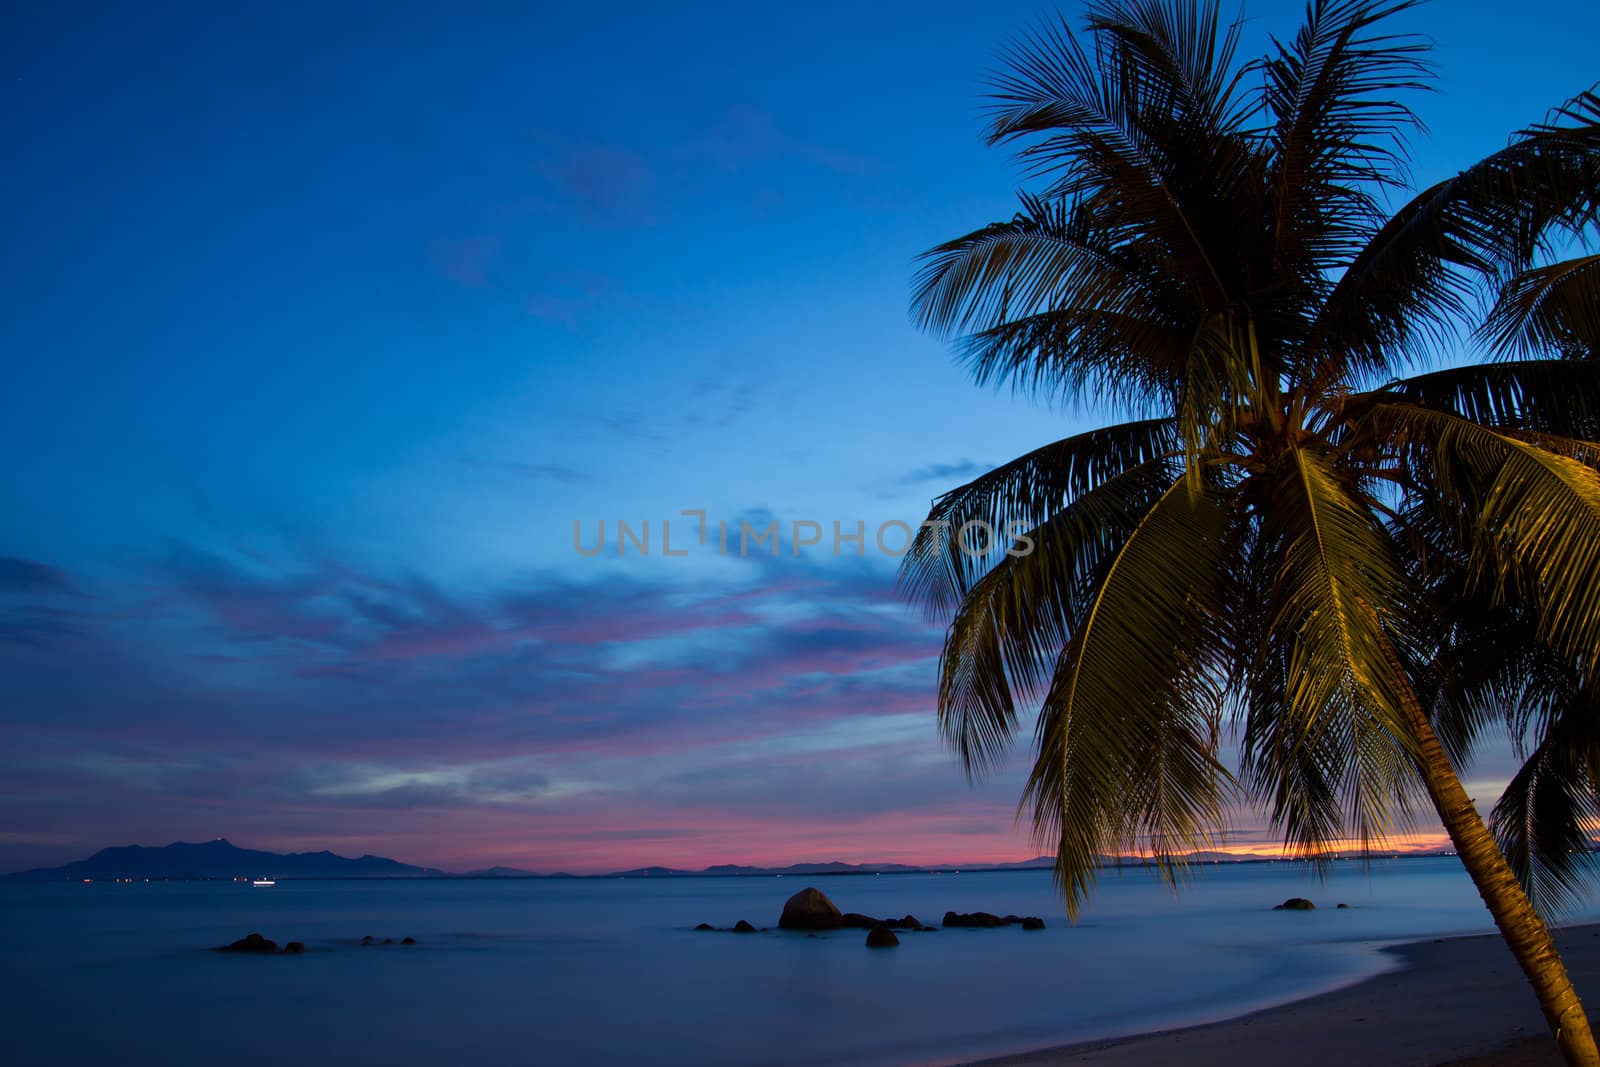 Coconut palm tree at sunrise against blue sky, picture taken using long exposure.